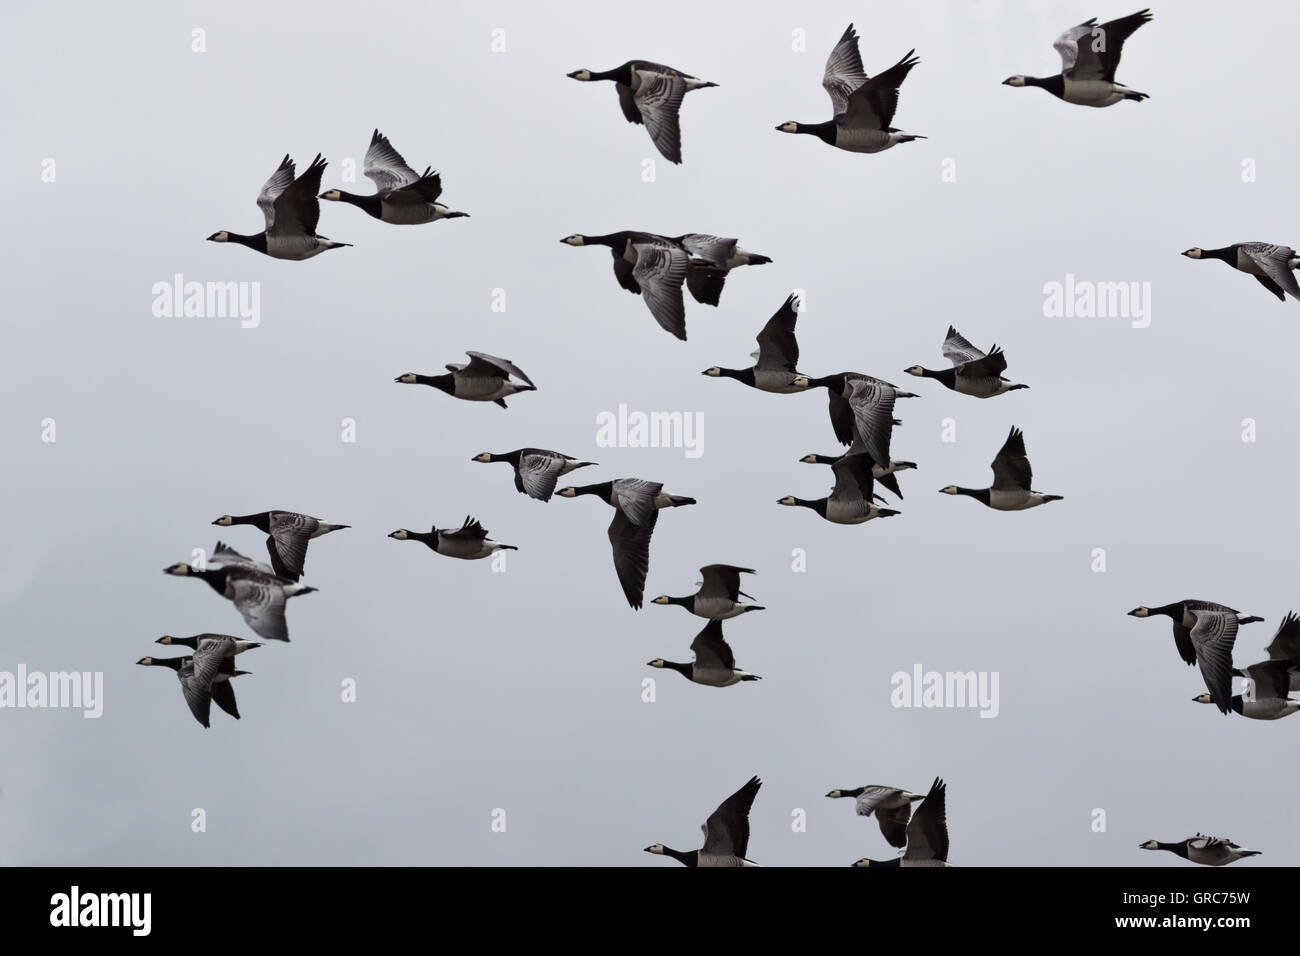 Wild Geese In The Swarm Stock Photo